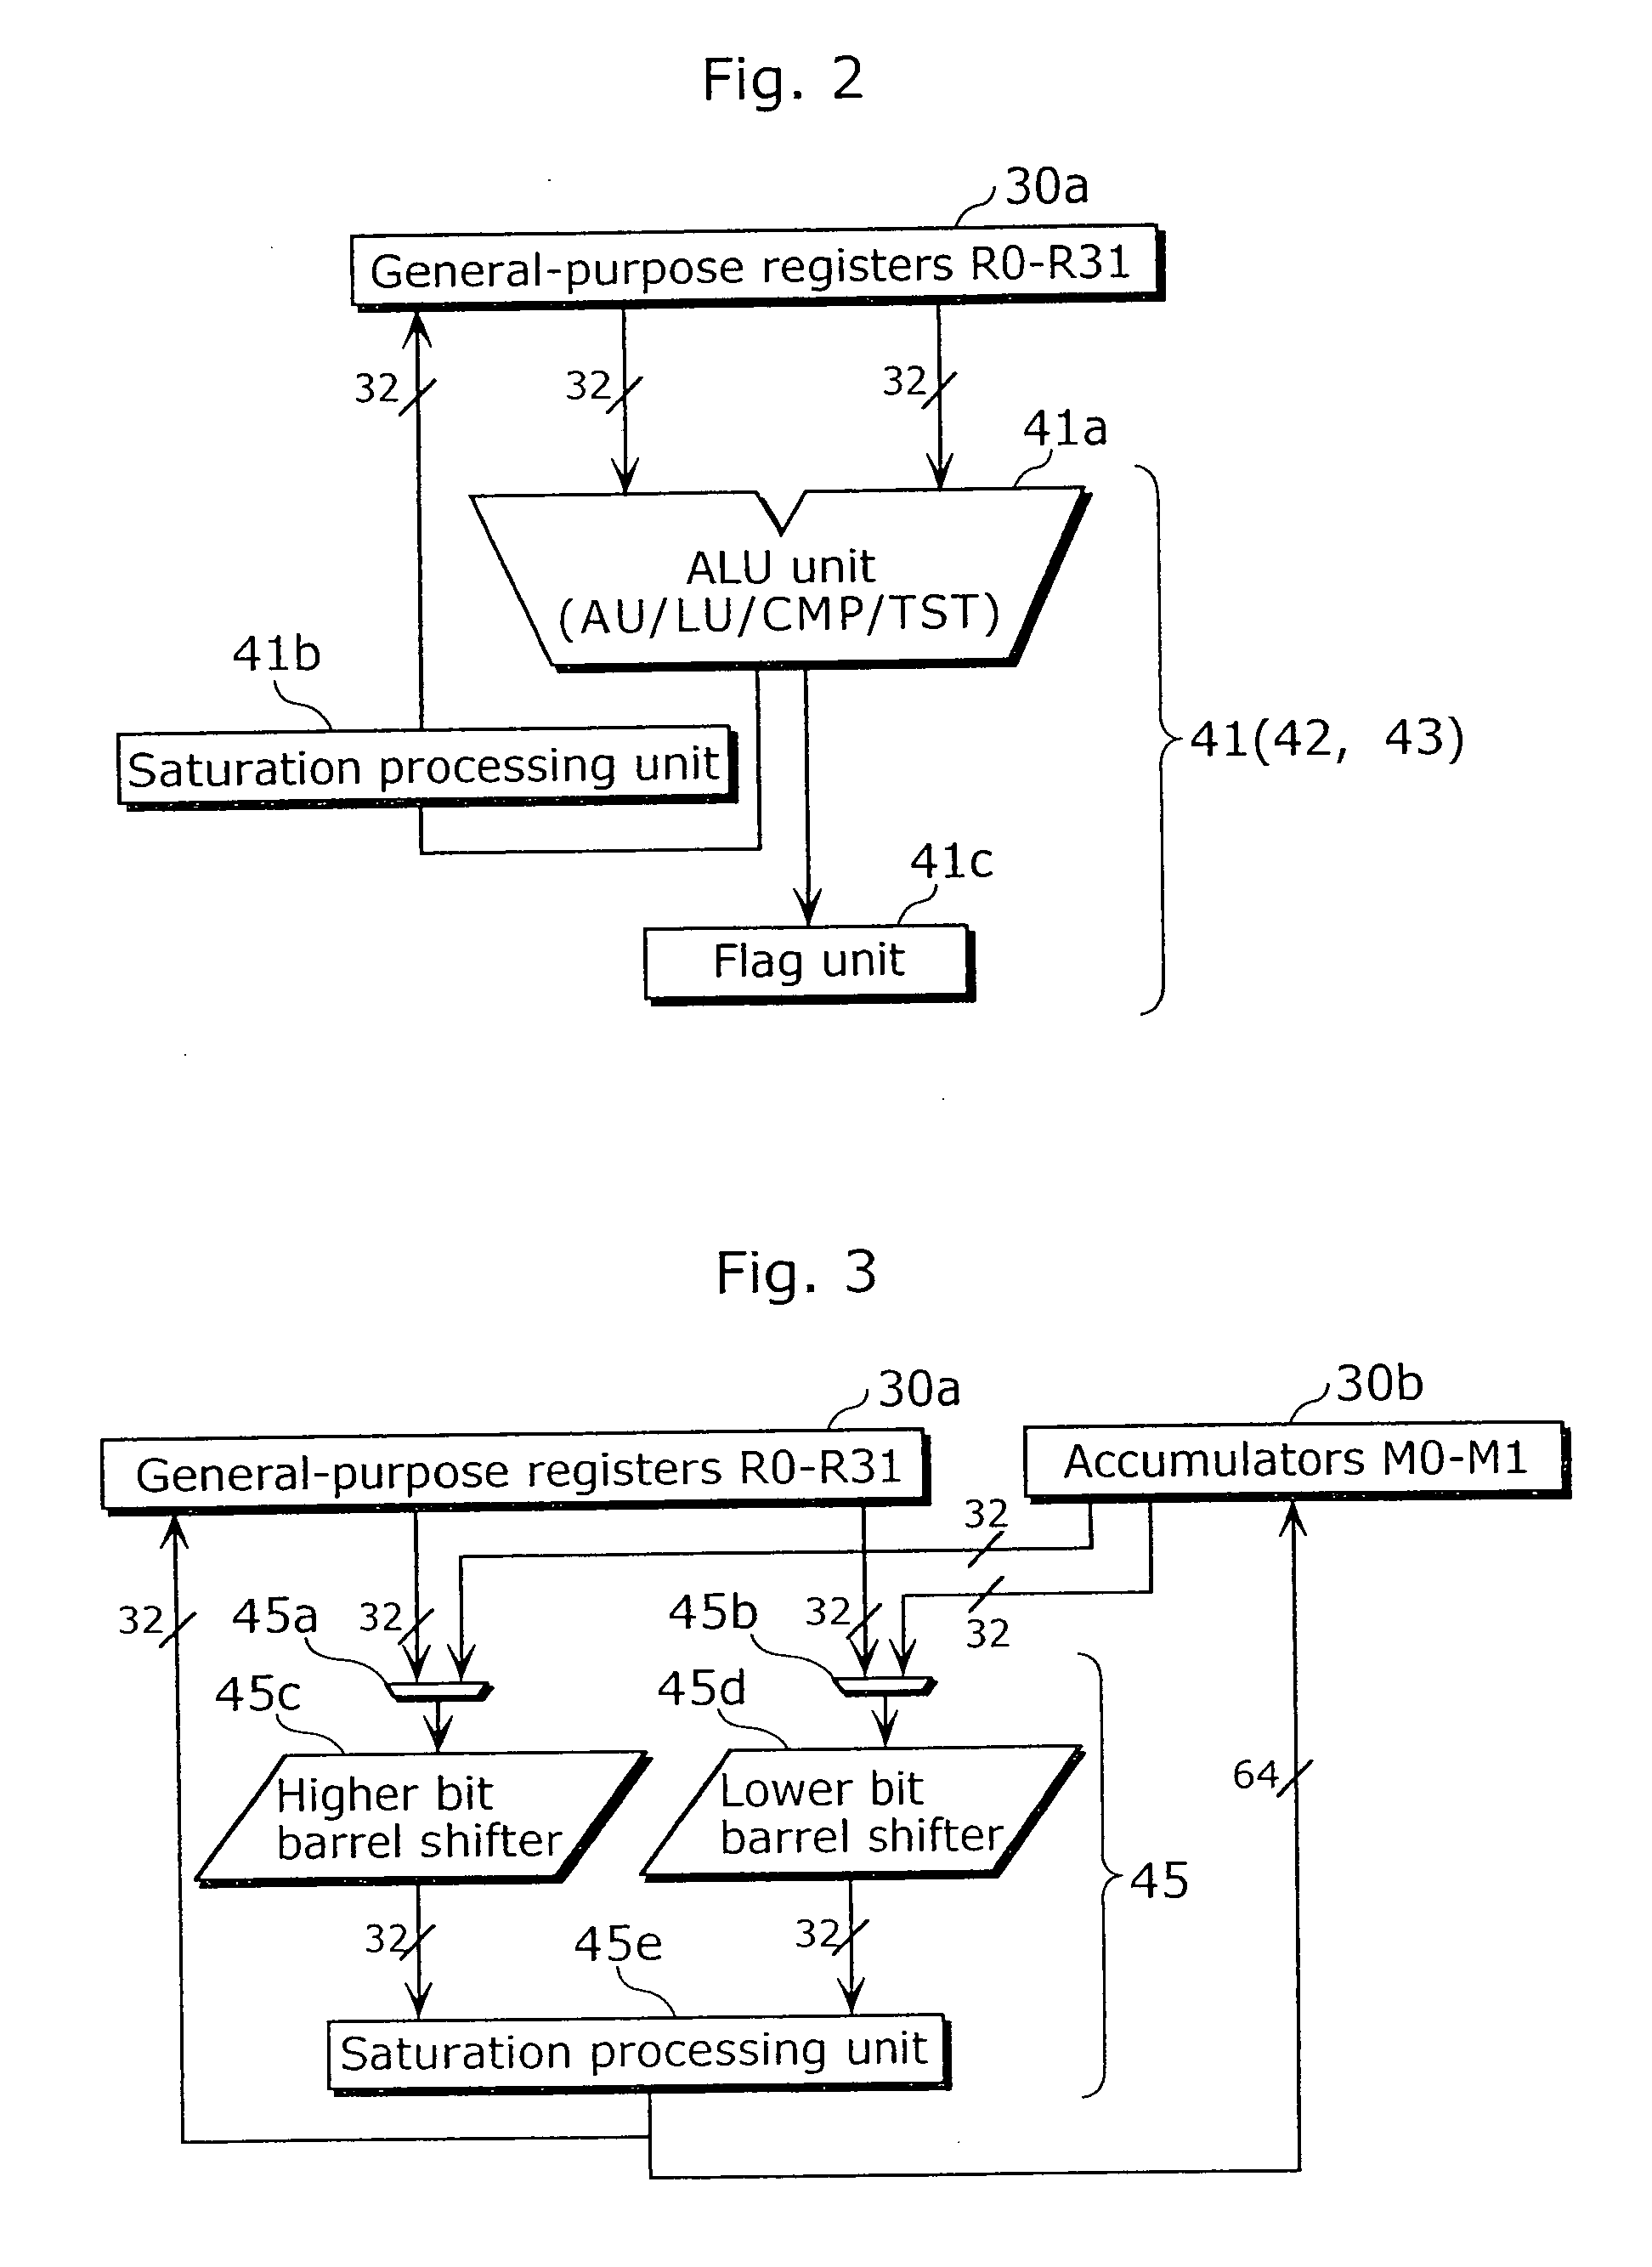 Compiler, compiler apparatus and compilation method